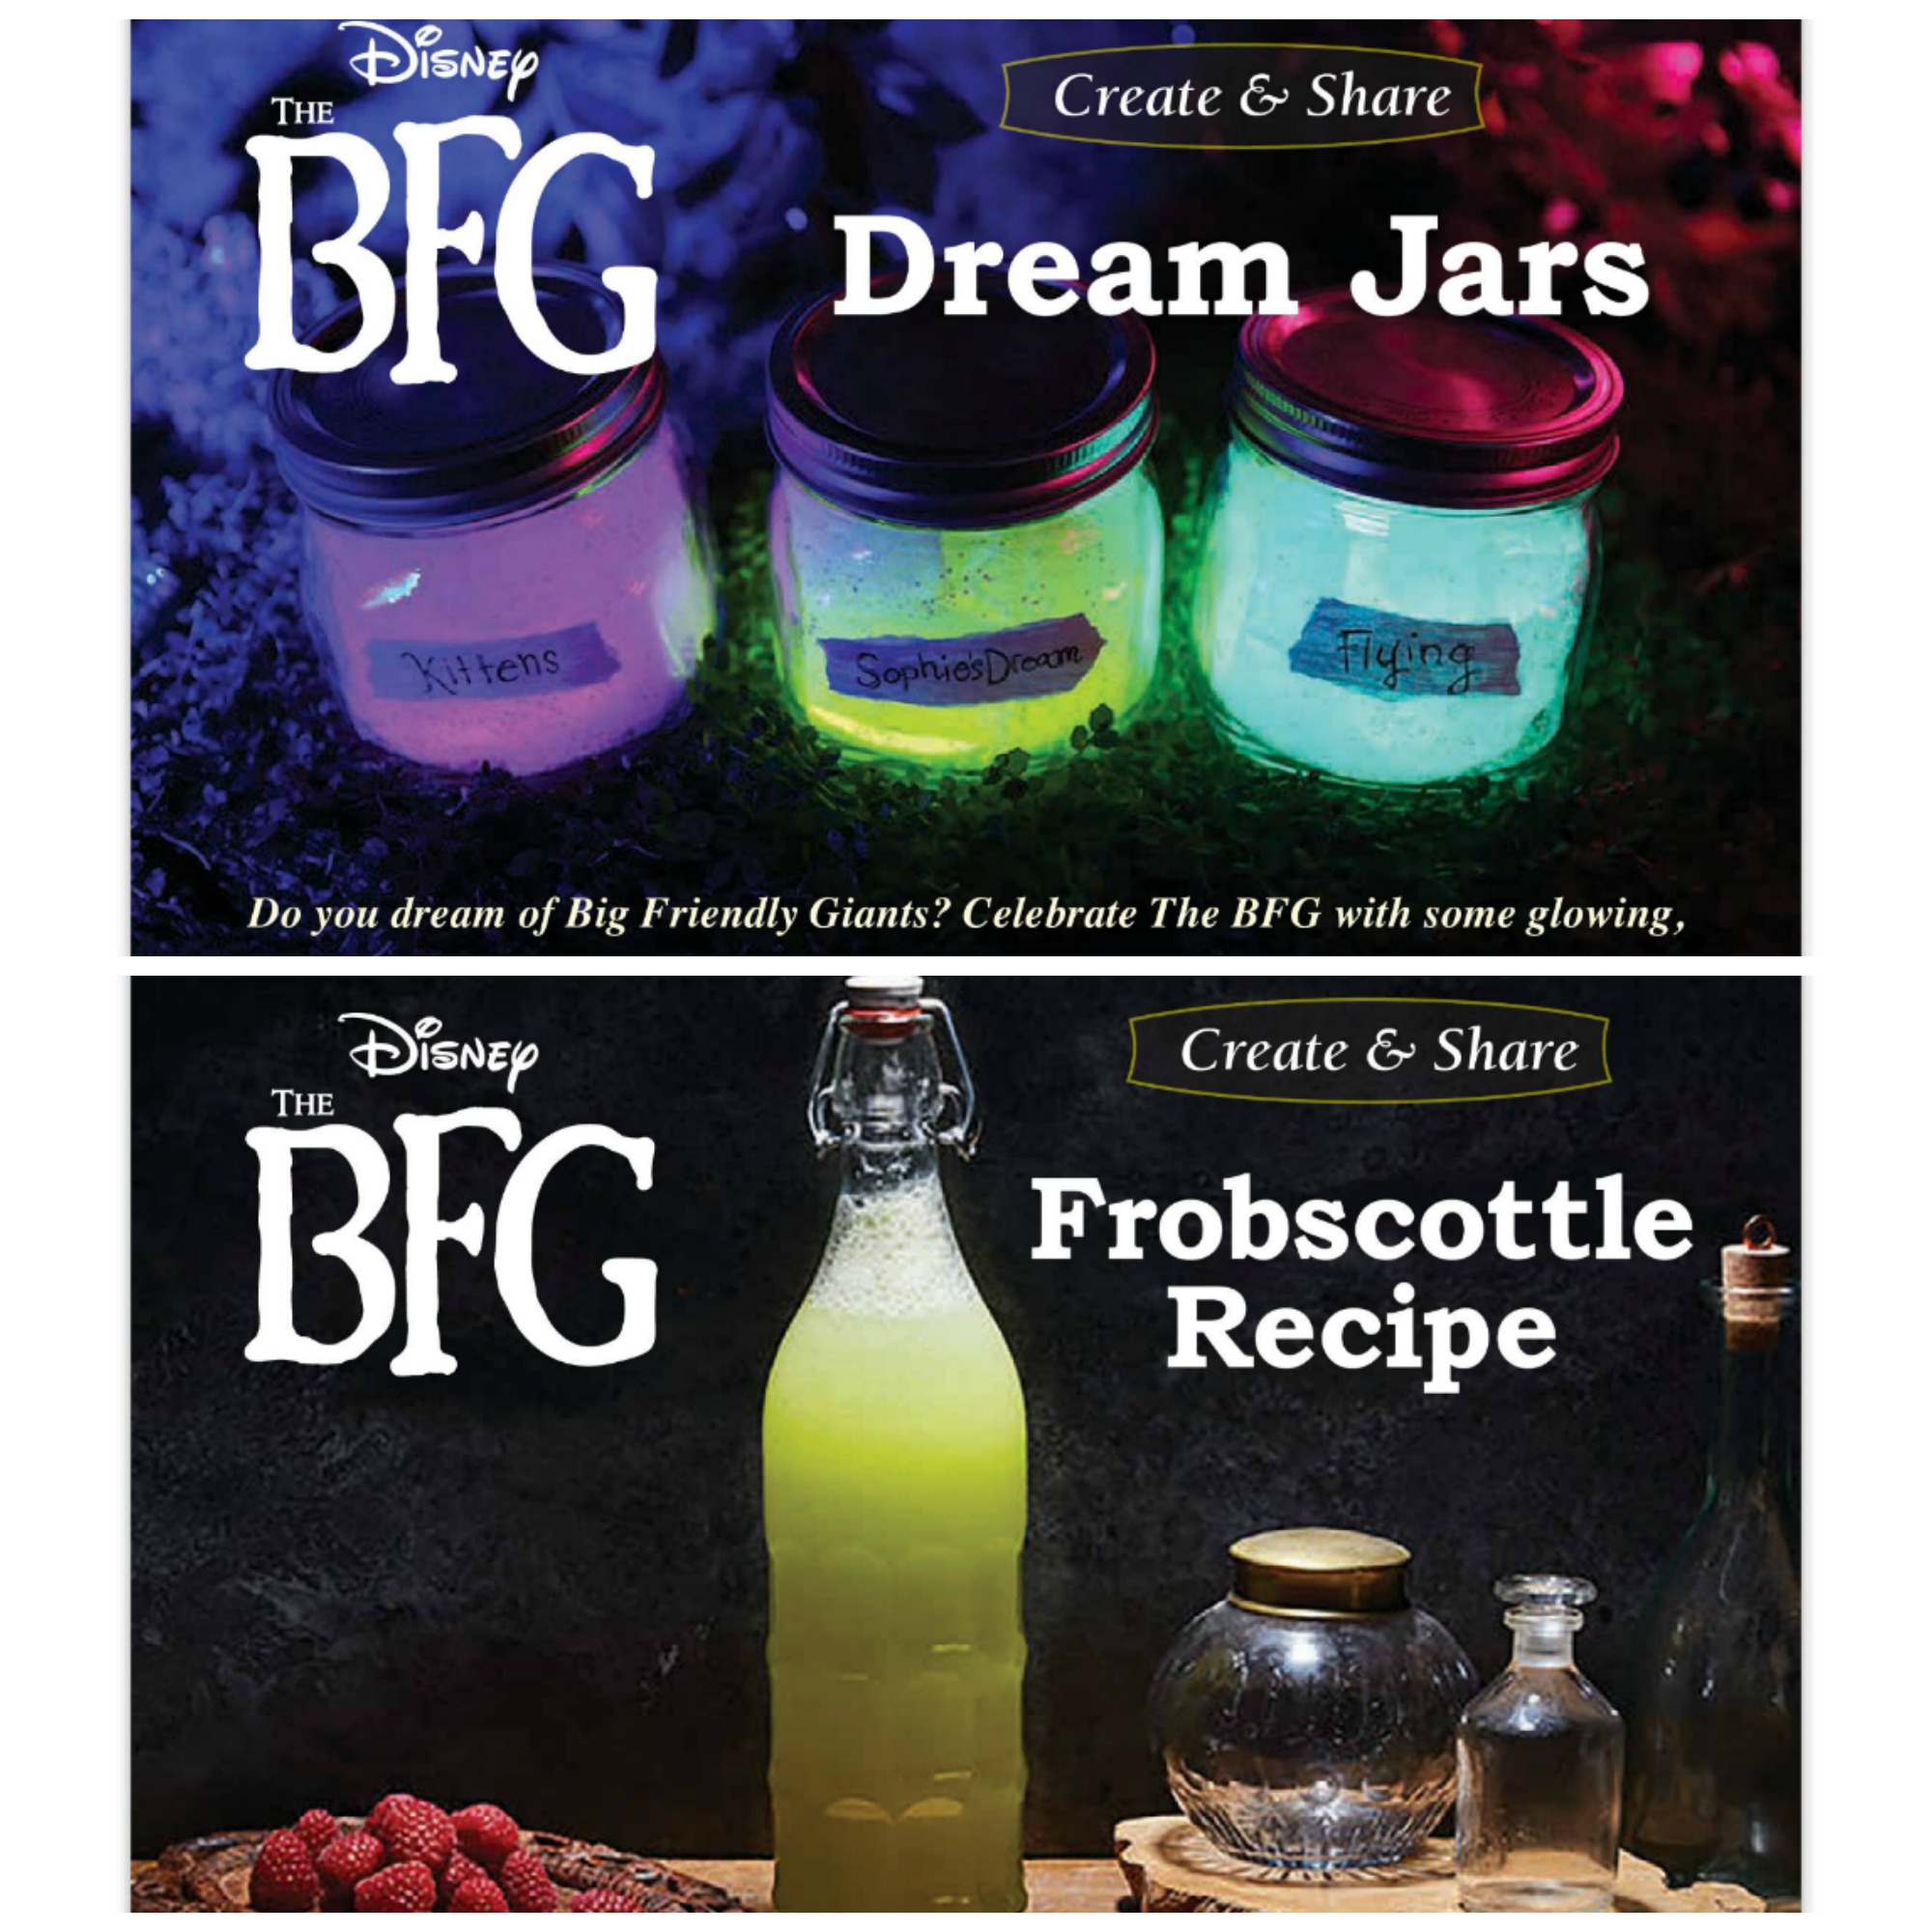 Make Disney's The BFG Dream Jars and Frobscottle Recipe #TheBFG #TheBFGBluRay